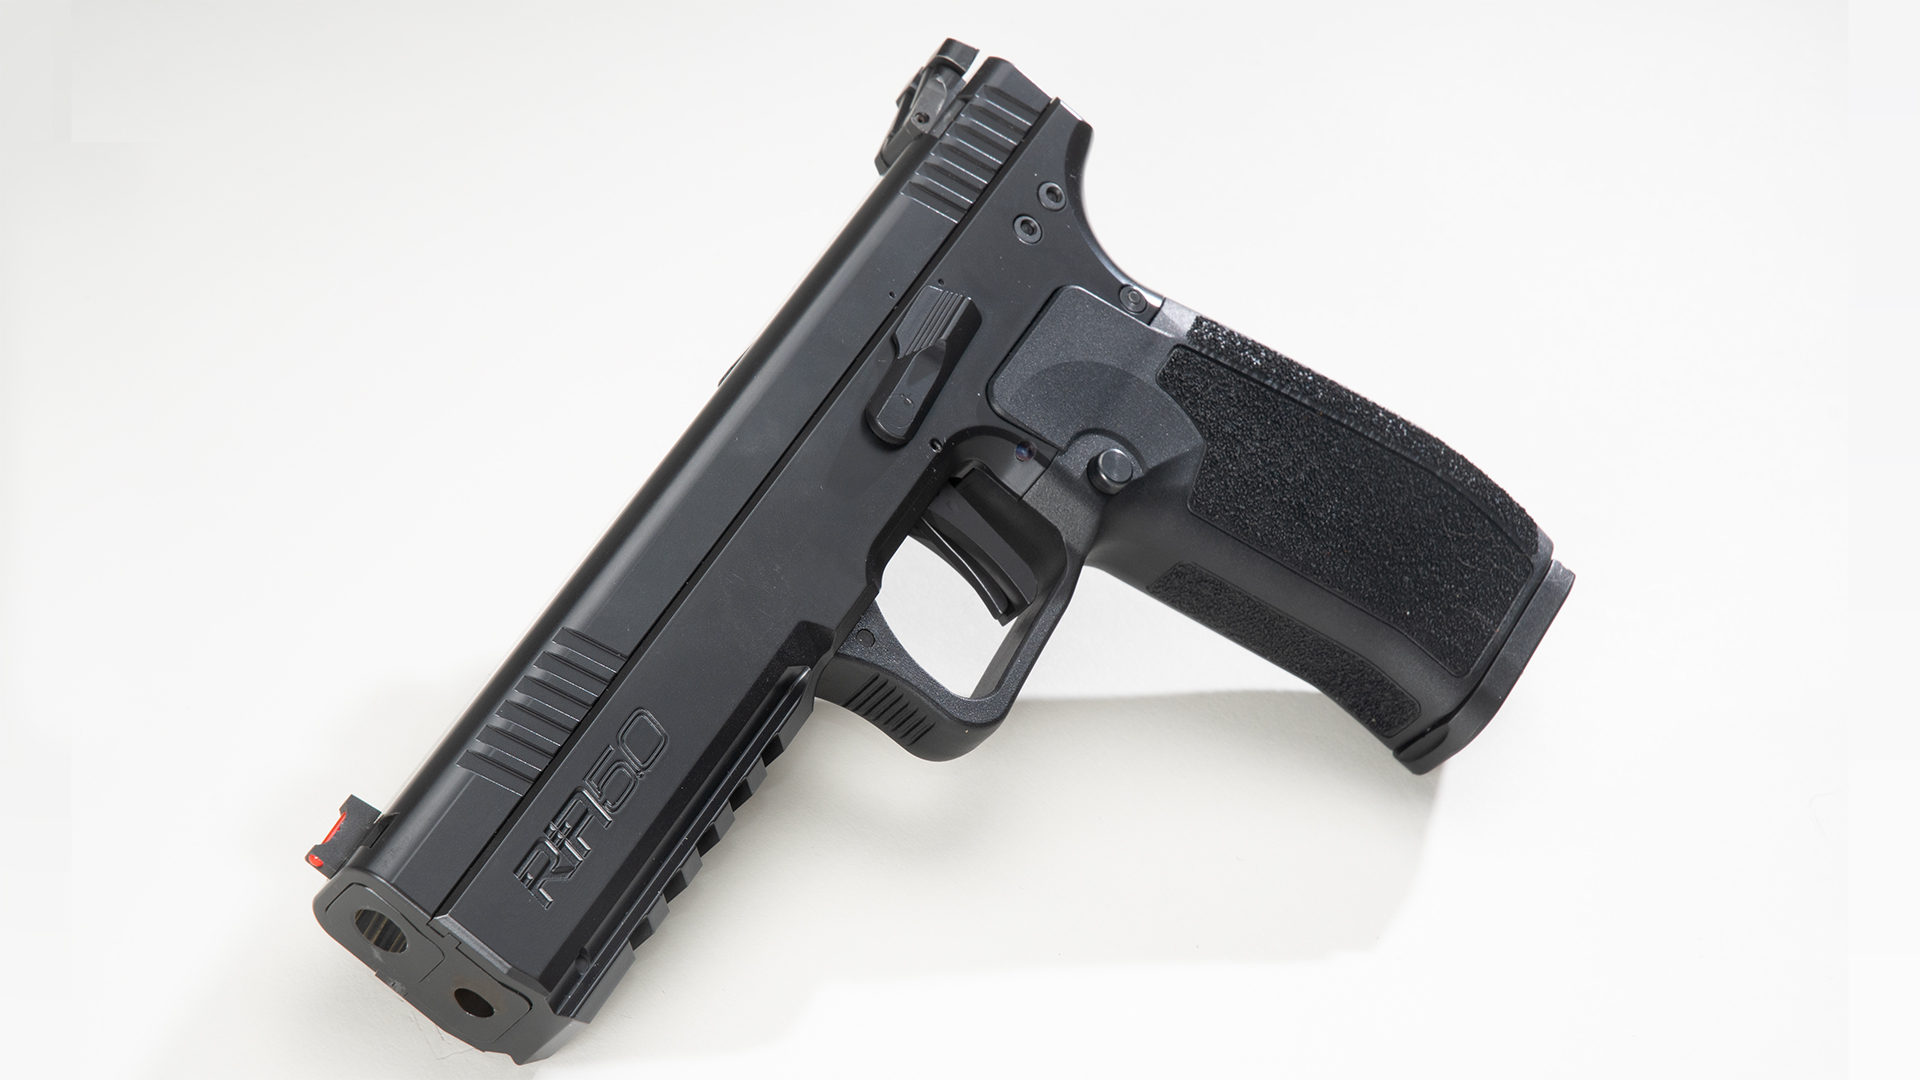 review-rock-island-5-0-9mm-pistol-an-official-journal-of-the-nra